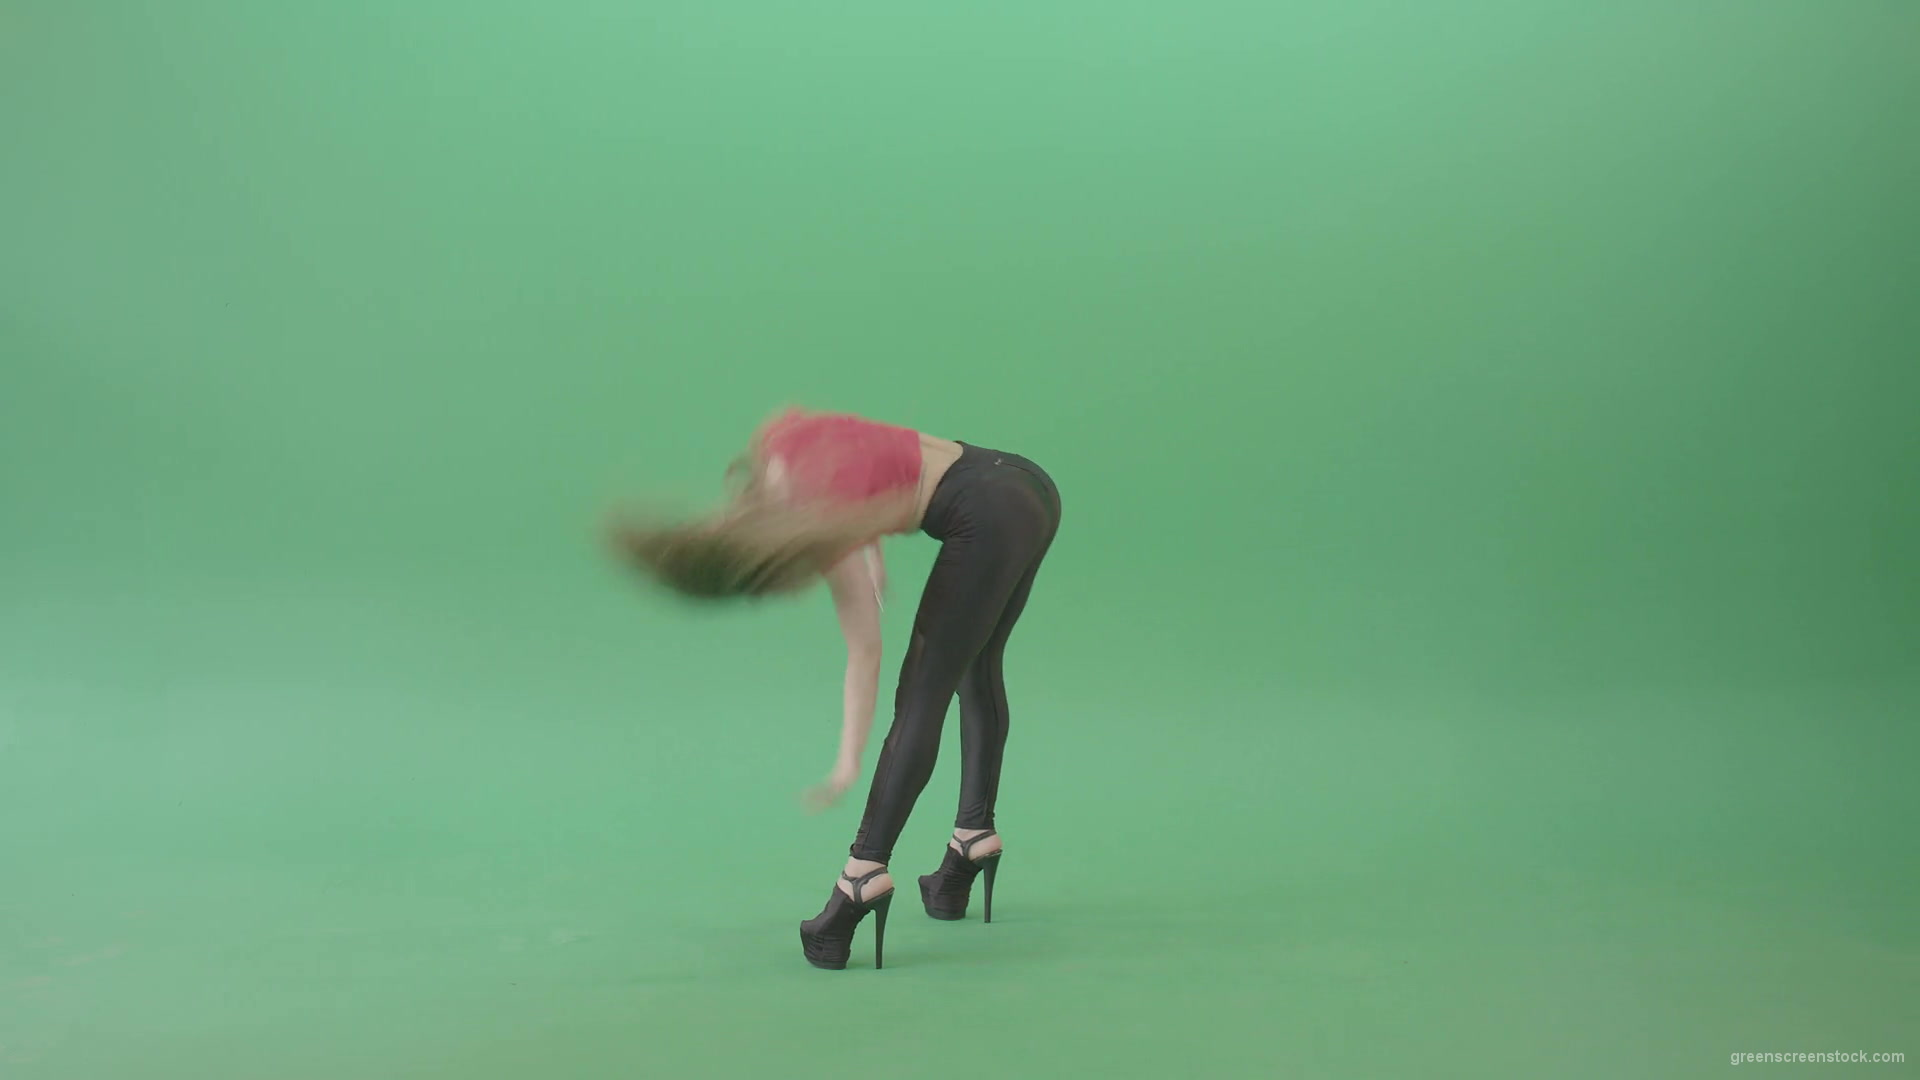 Sexy-posing-girl-showing-buts-and-dancing-on-green-screen-4K-Video-Footage-1920_005 Green Screen Stock